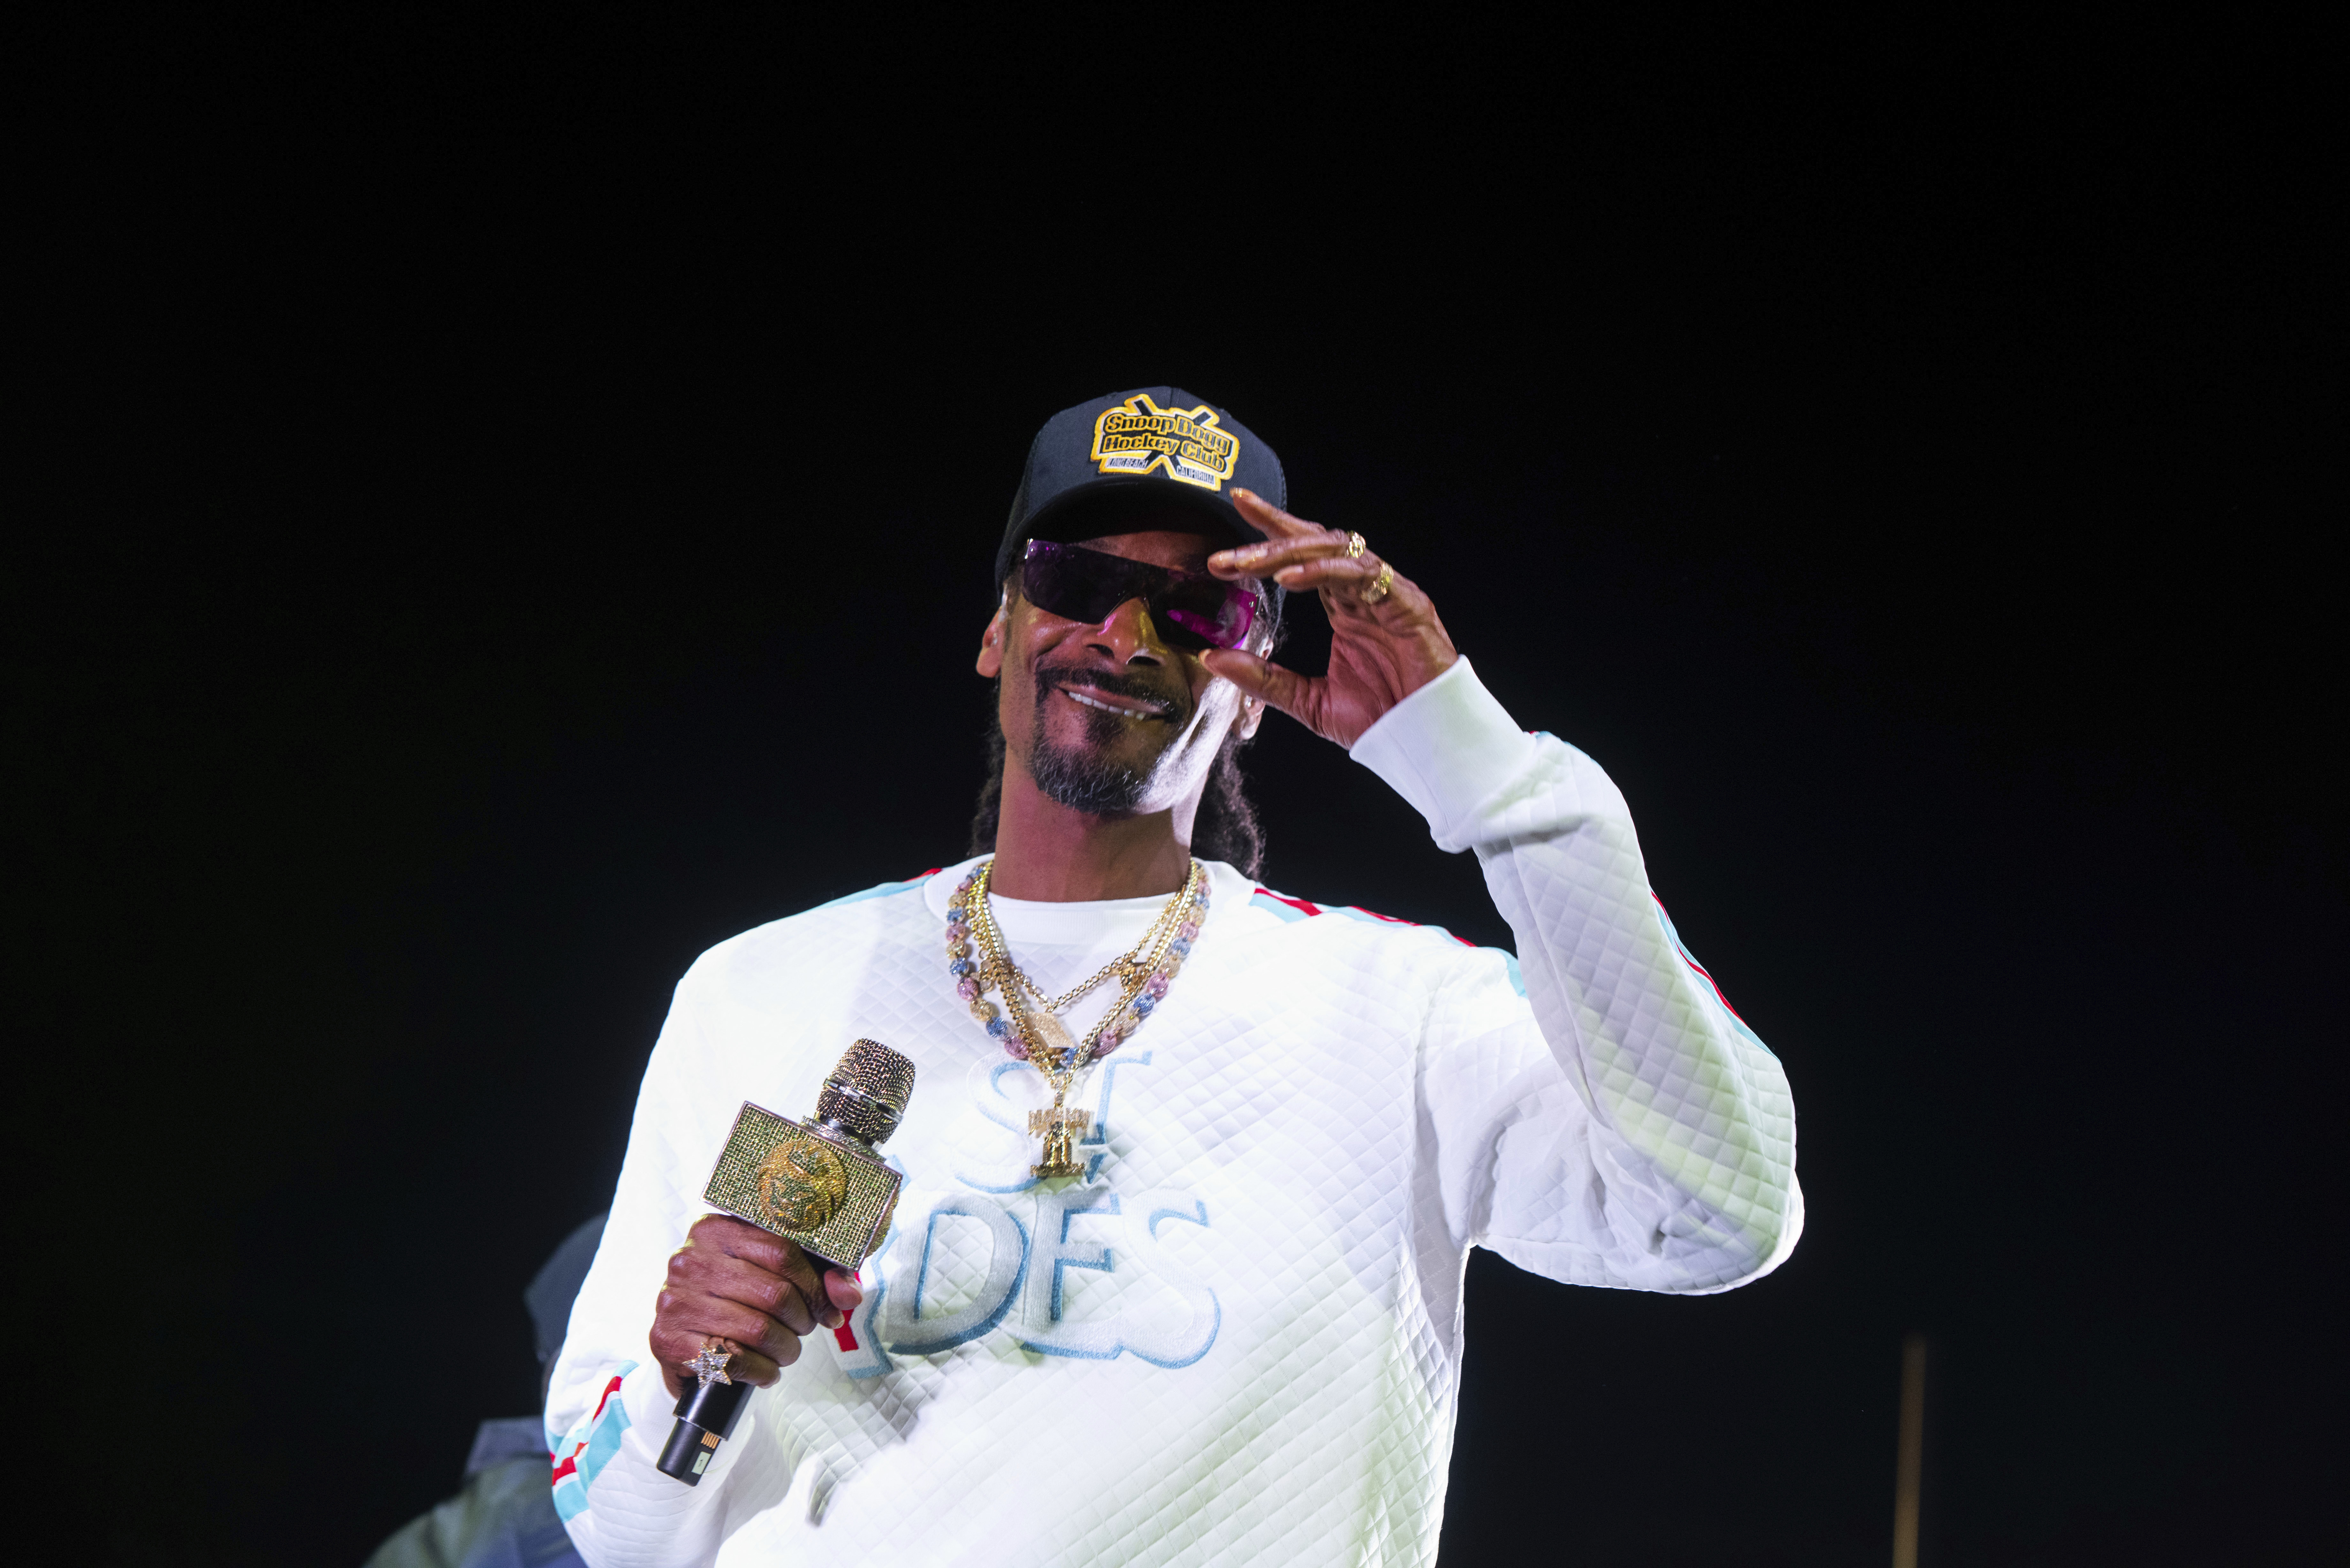 Kansas apologizes for risque Snoop Dogg show at hoops event